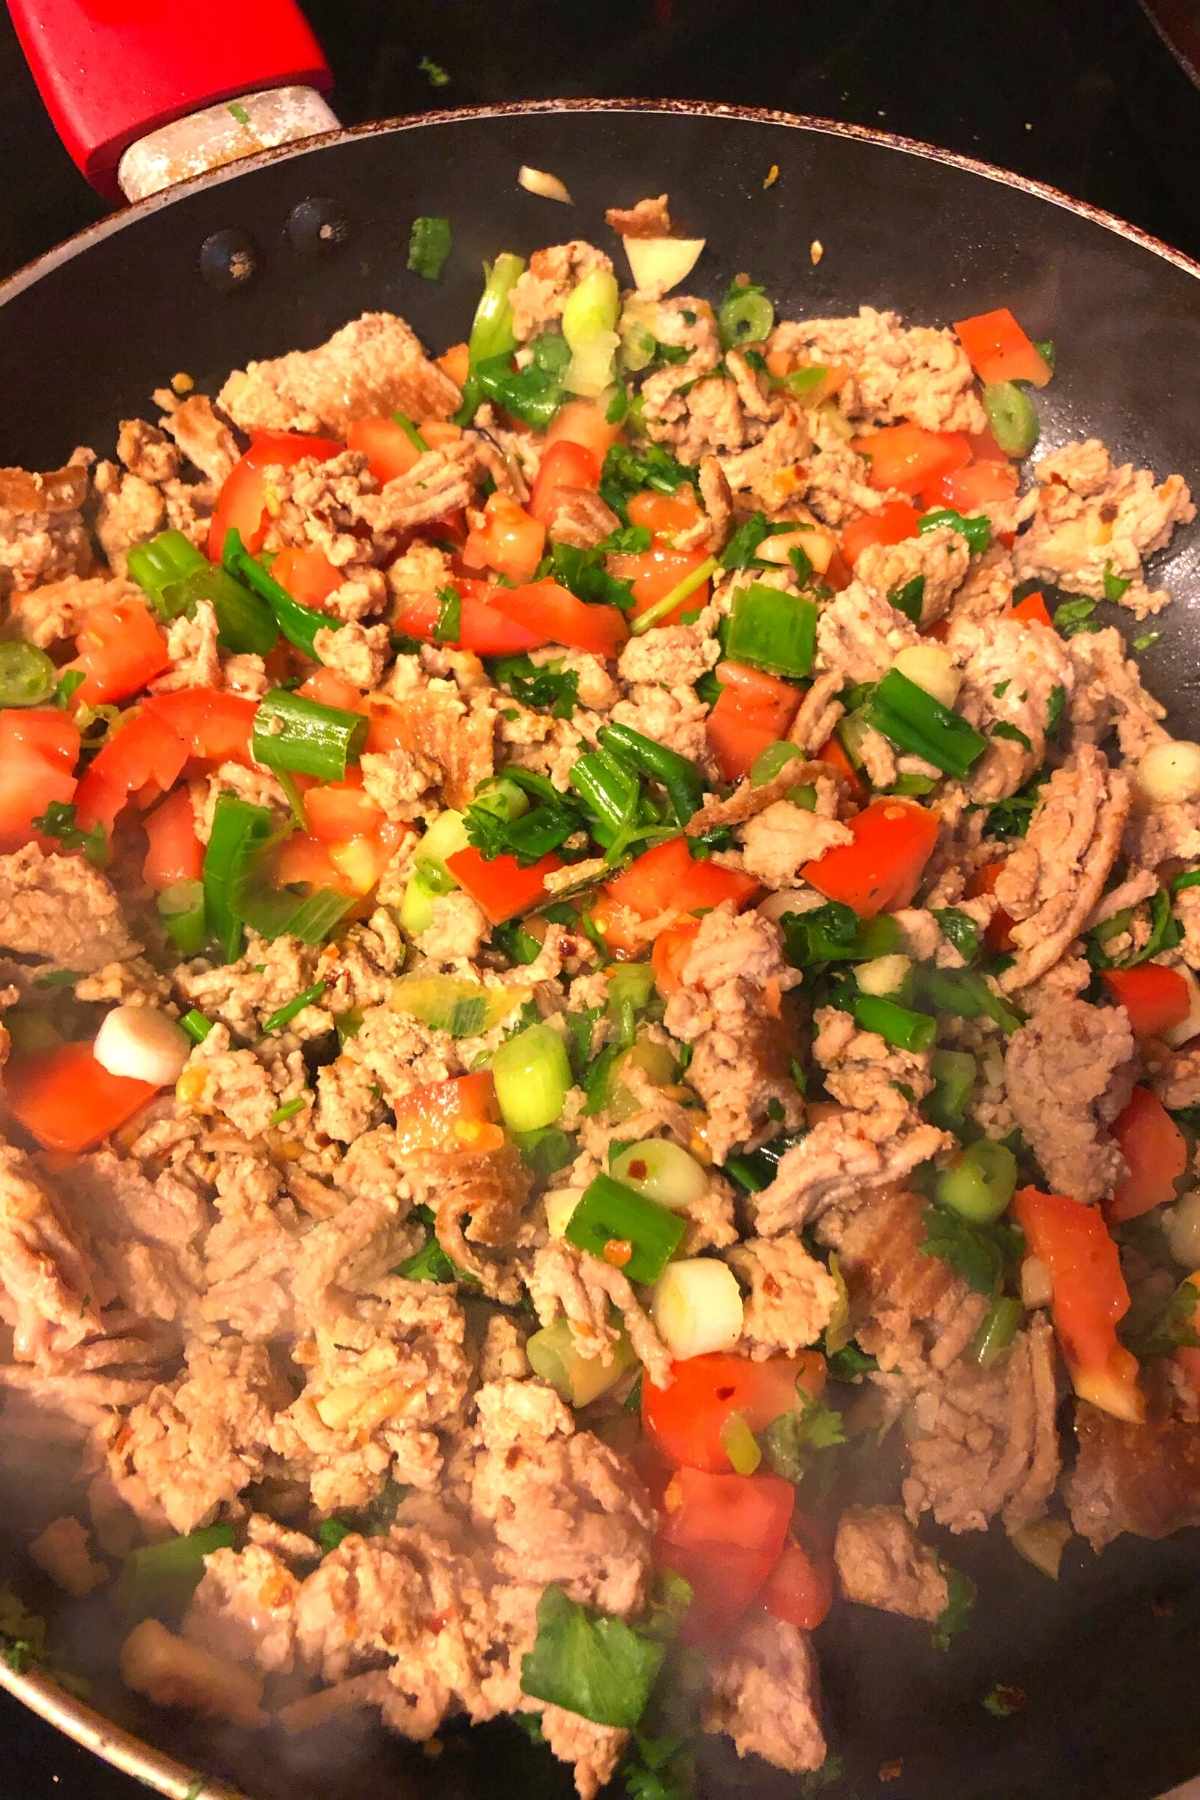 turkey skillet meal with vegetables to help with clean eating for weight loss